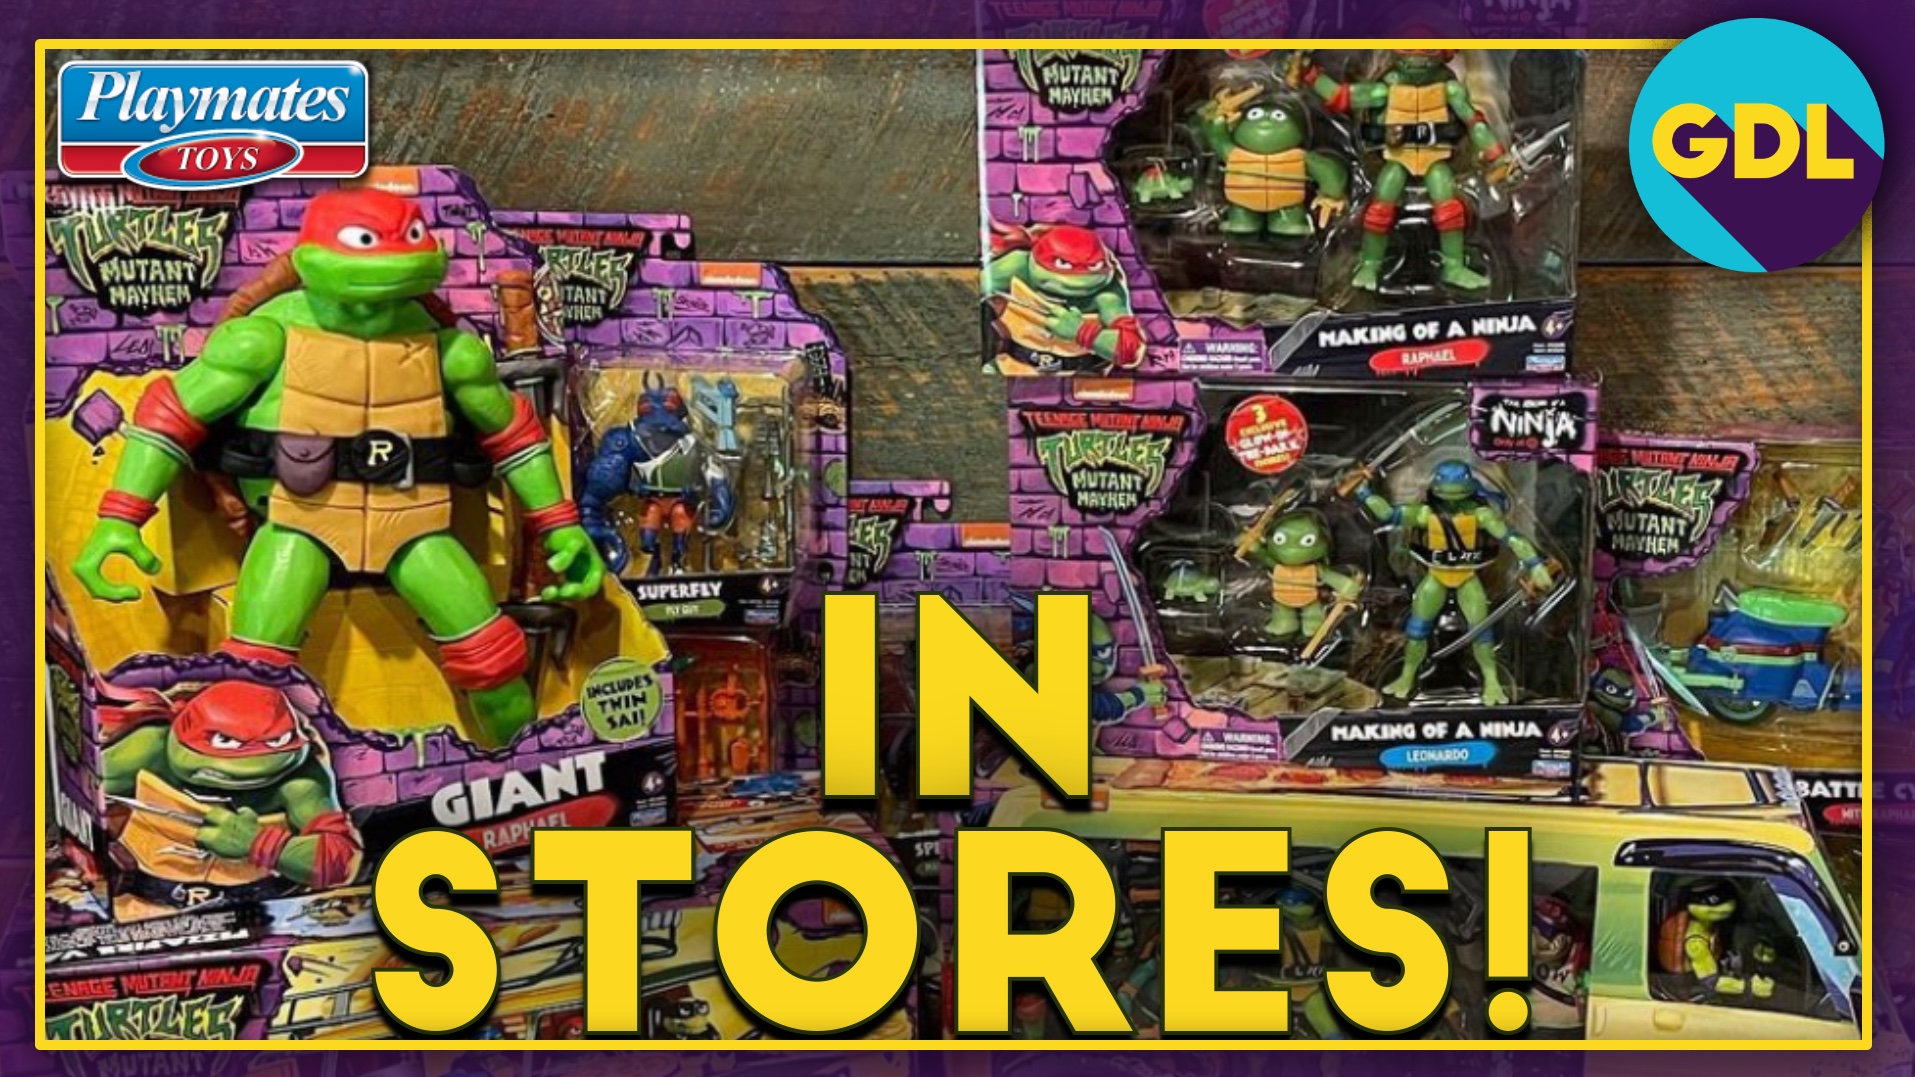 NECA Mirage TMNT Toys Now Available on Target! - Geek. Dad. Life.